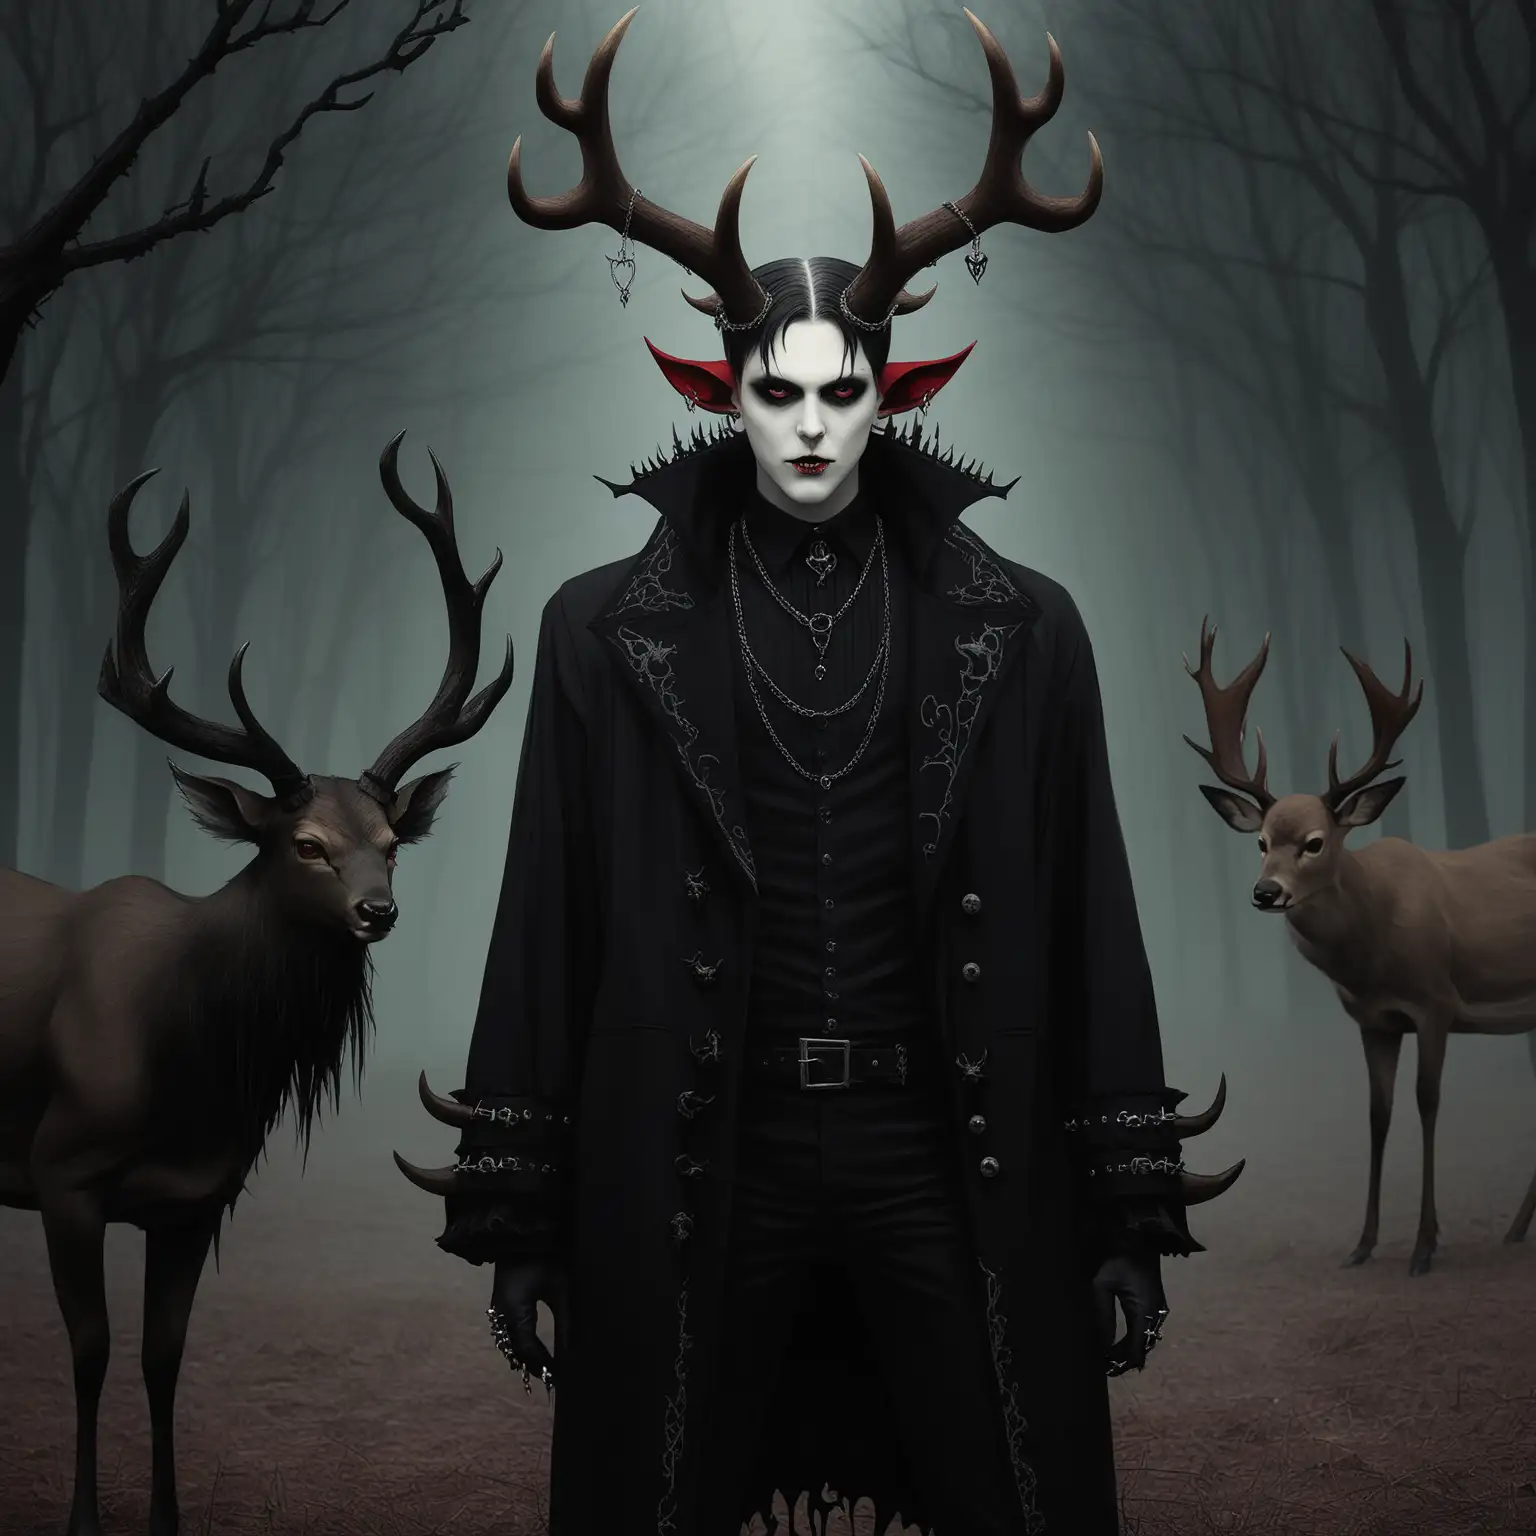 Dark Gothic Man with Deer Horns and Demon